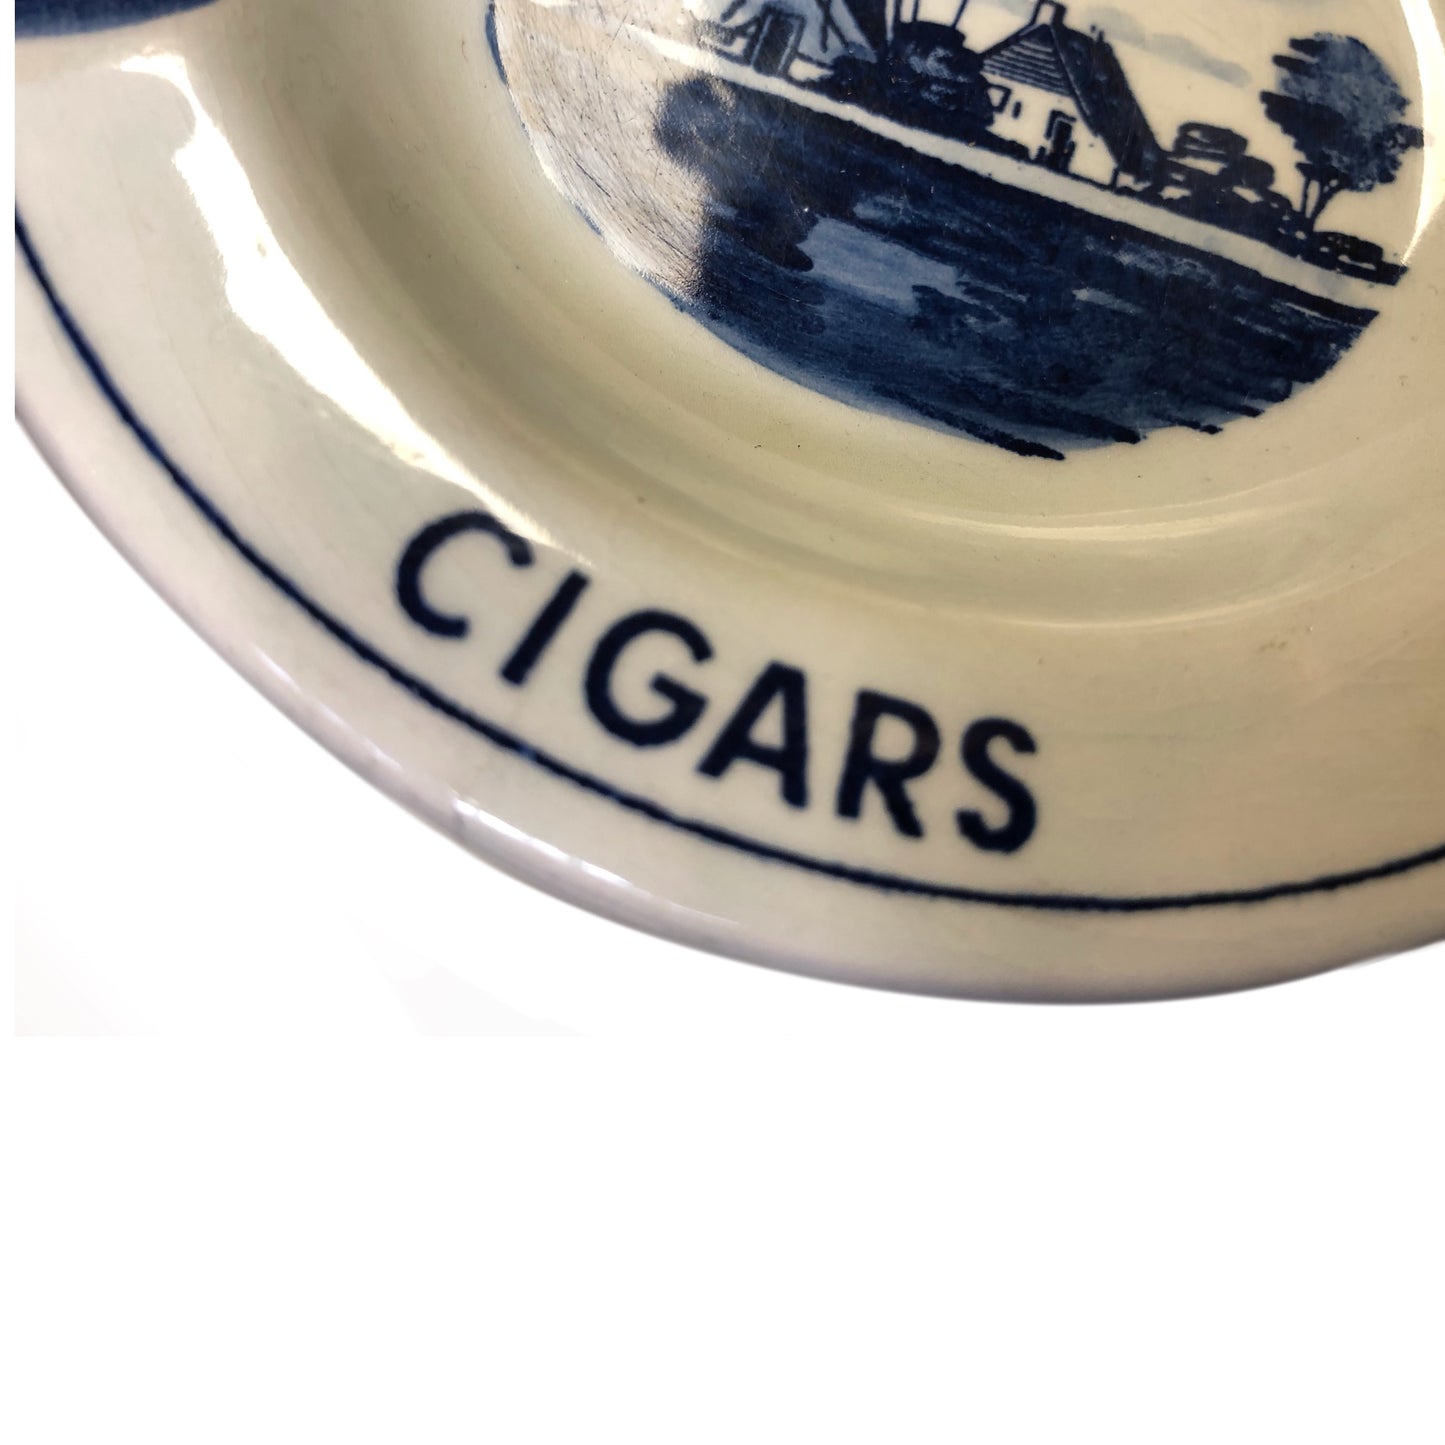 Load image into Gallery viewer, henry wintermans cigar ashtray
